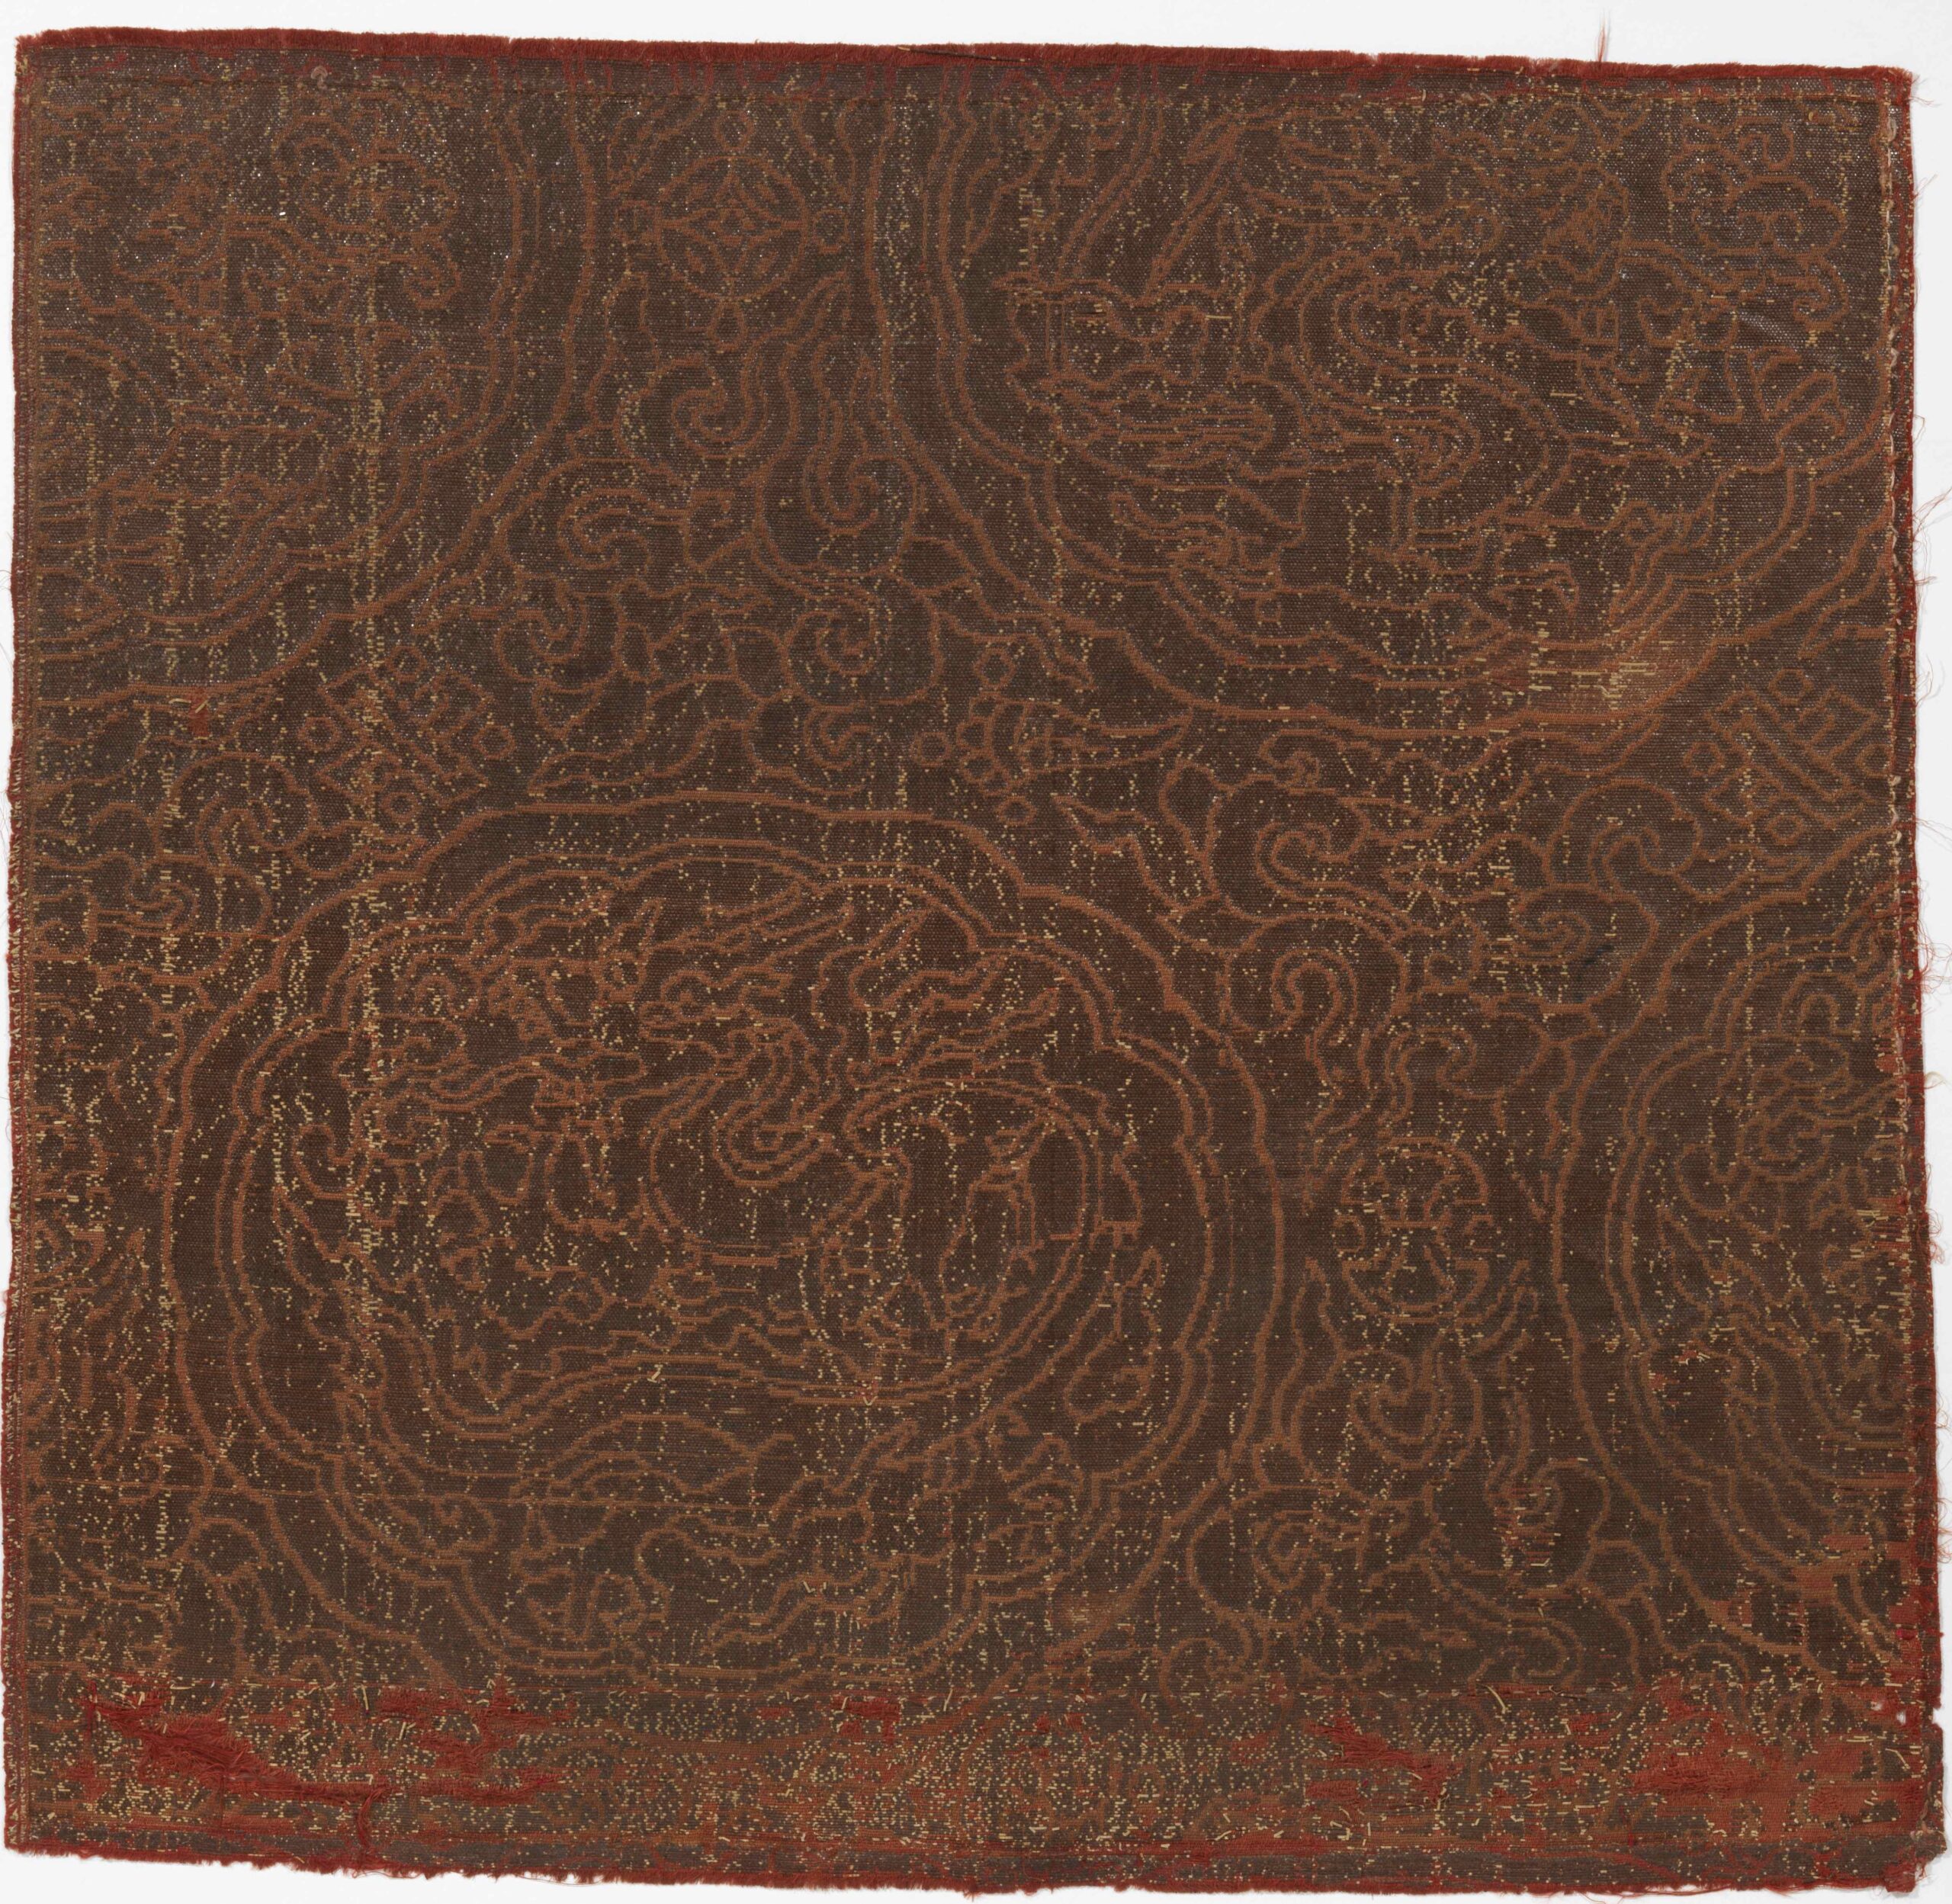 A silk dragon-medallion patterned square fragment